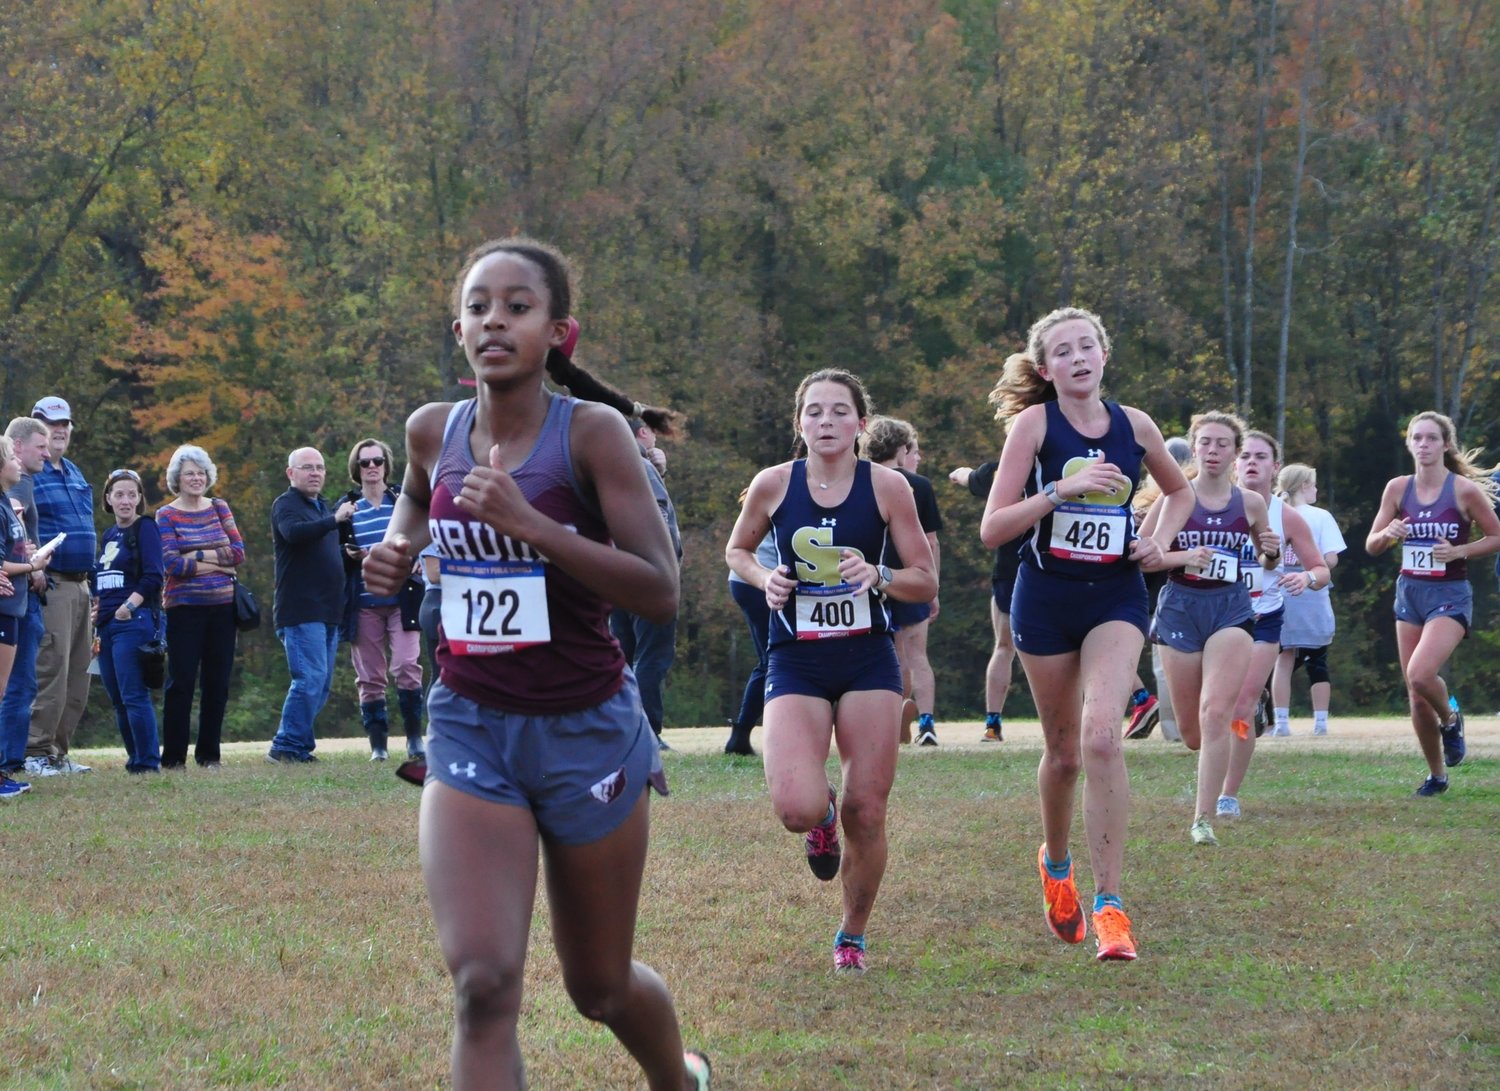 Broadneck High School freshman Nya Williams, front, competed at the county cross country championships at South River High School in Edgewater on October 26. Williams went on to finish with a time of 21:45.6 on the 3-mile course.